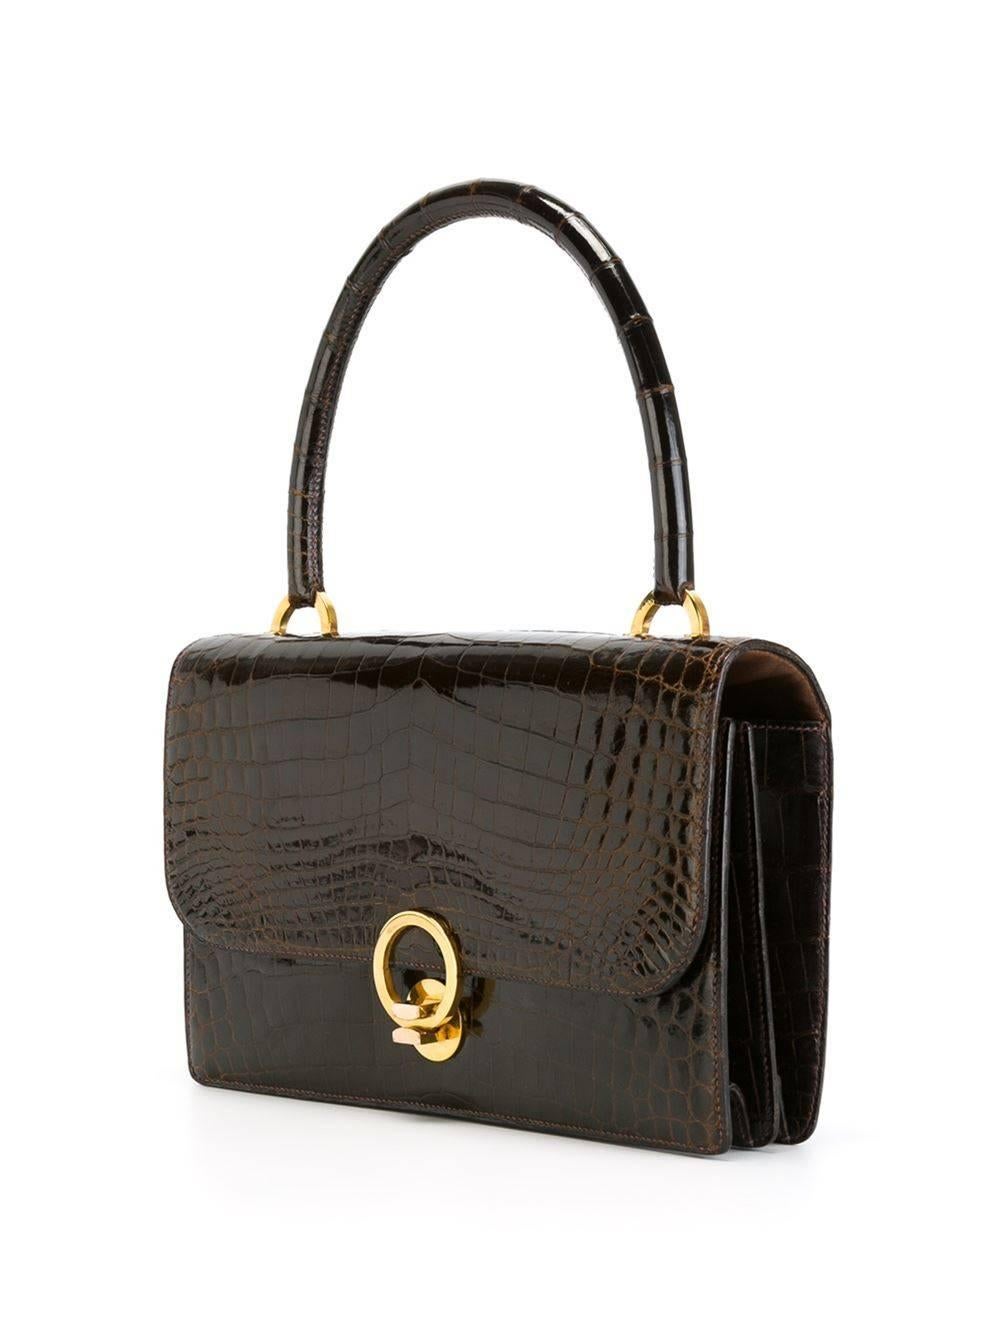 Fabulous Hermes Ring handbag of the 50s. Exceptional brown porosus crocodile leather. Brown will be the new black in 2017. Just to love & cherish!  The french elegance. a Rarity in excellent condition. Delivered with Cites Document (5-10 opening